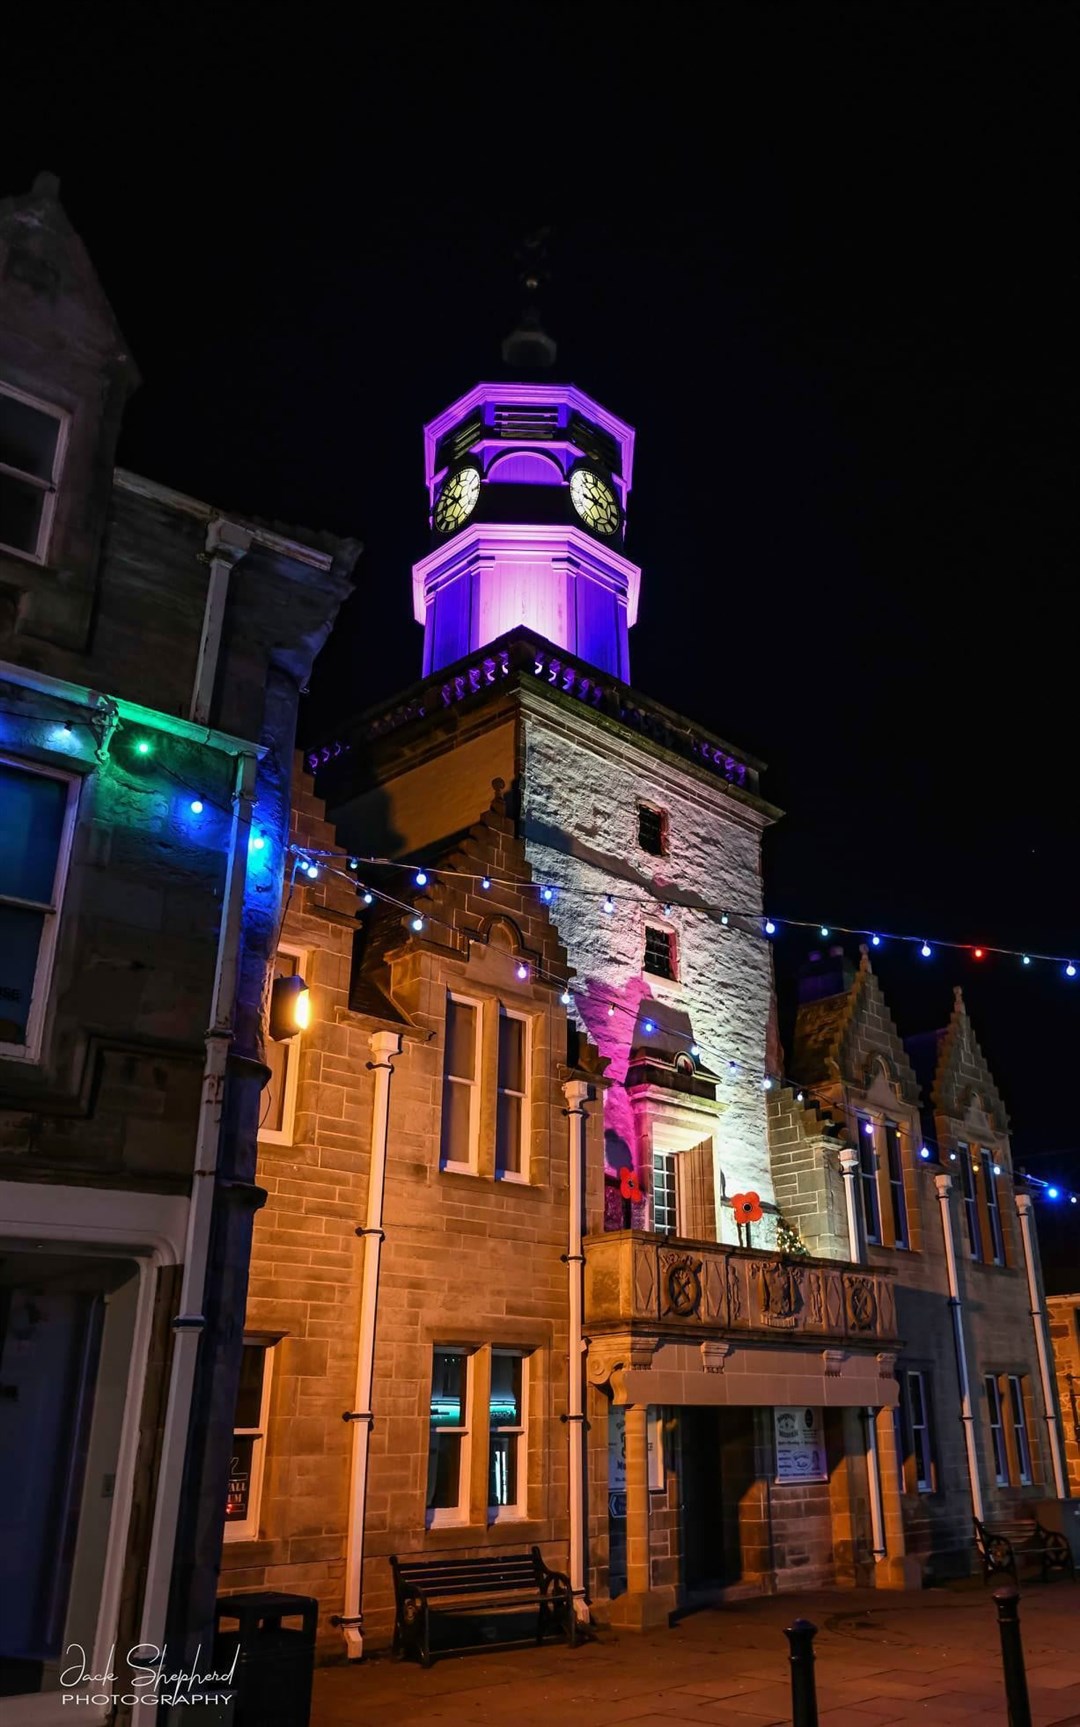 Dingwall Town Hall clocktower was lit to mark the day.